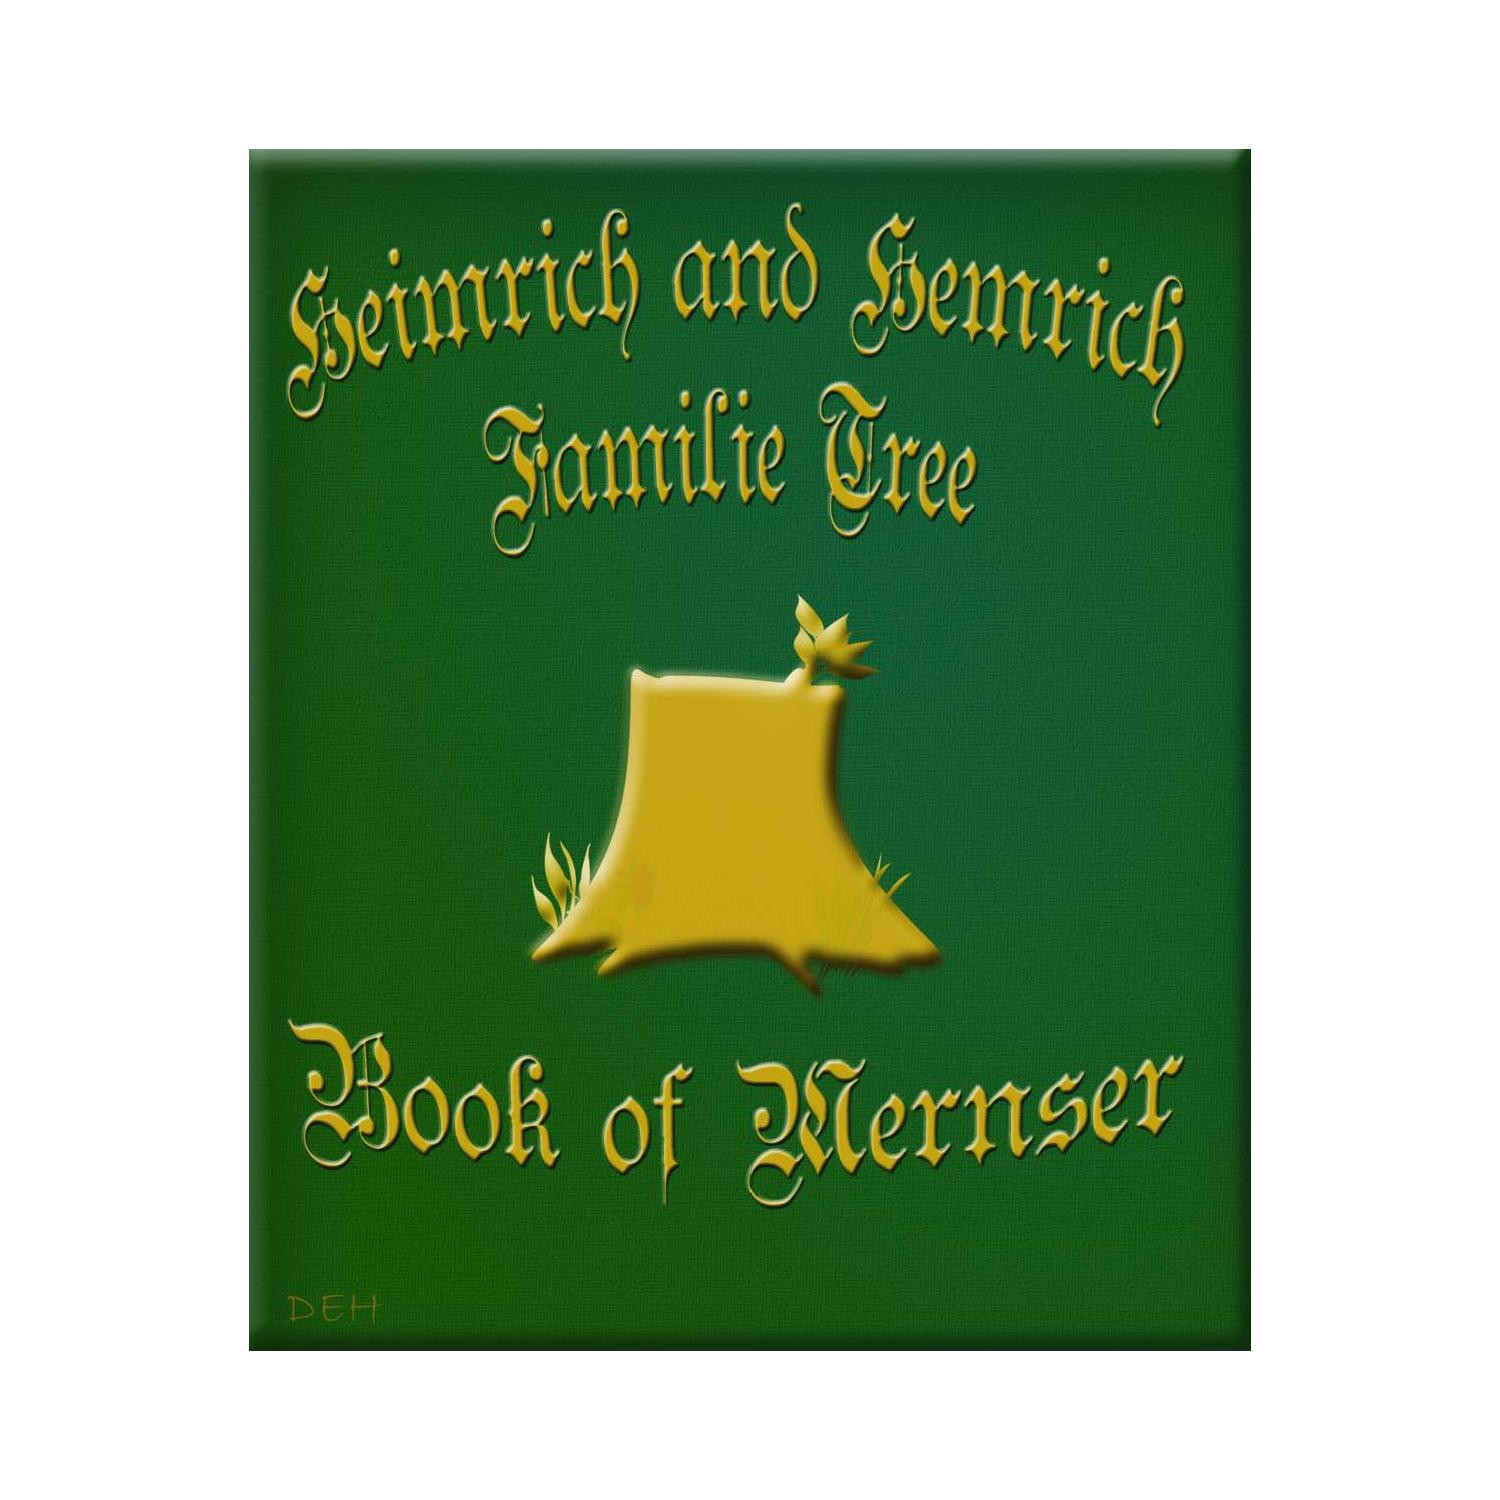 King and Knight Get Greeting Card Heimrich and Hemrich Family Tree by Hemrich Electric issuu